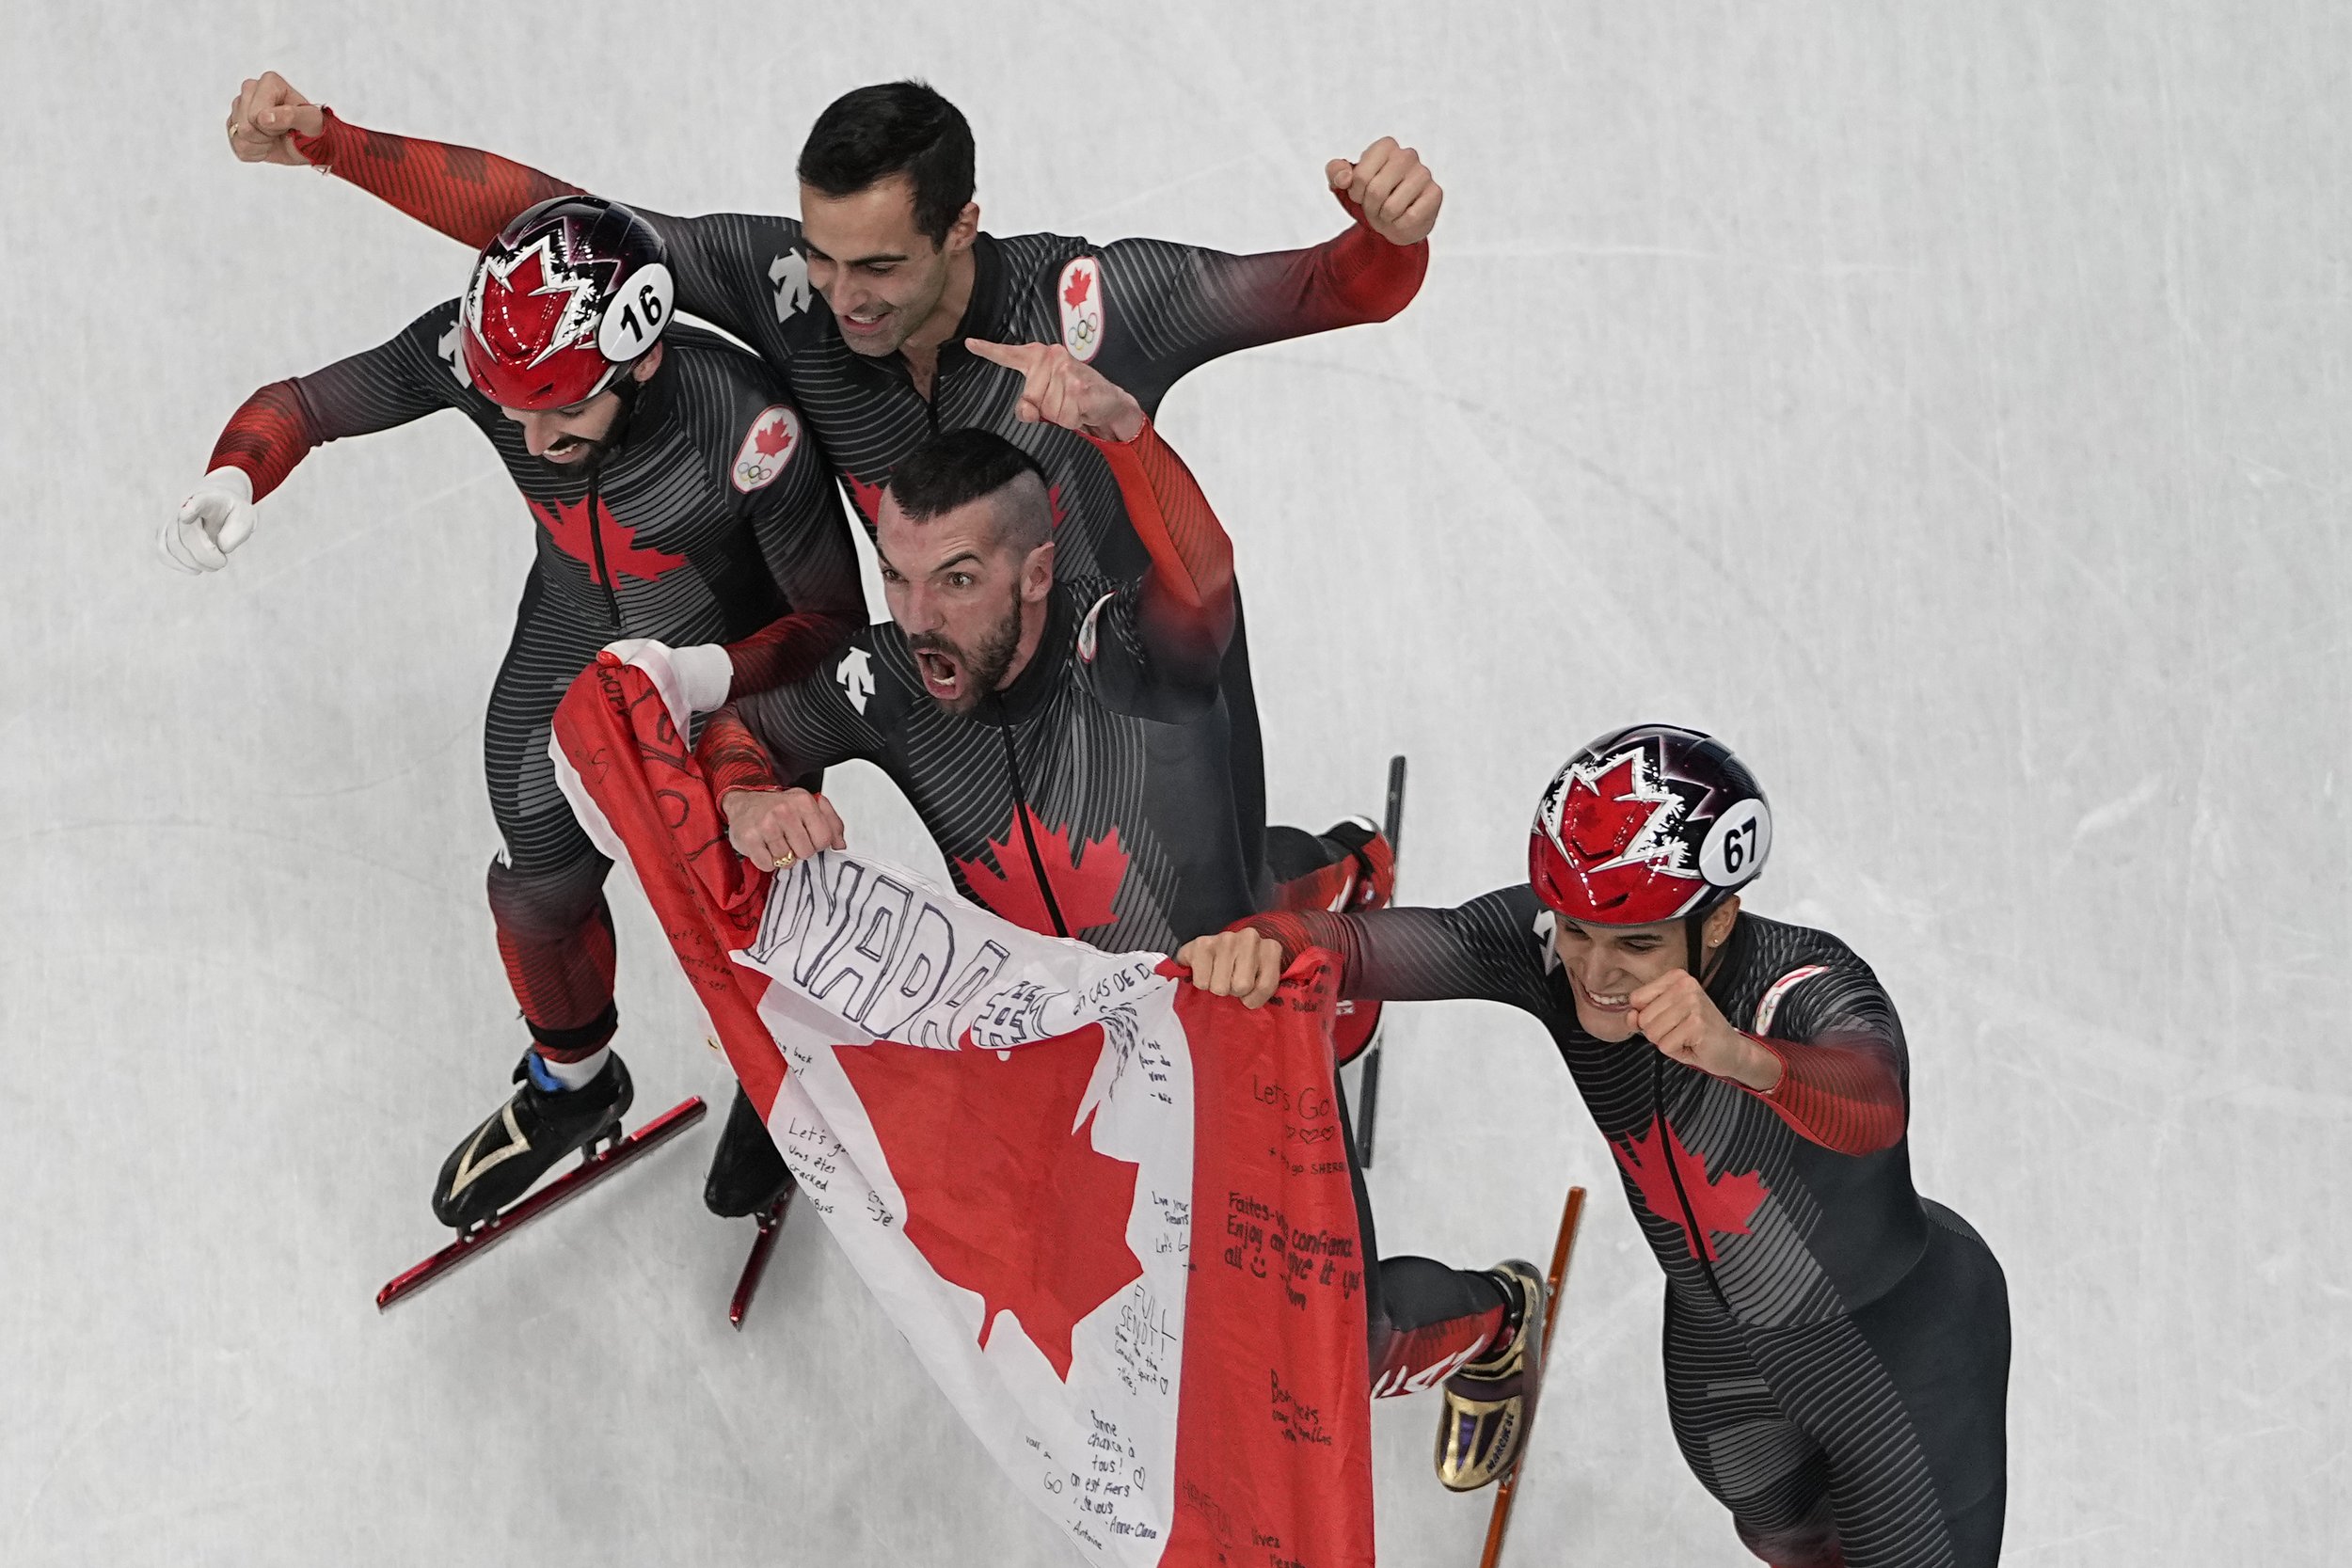  Members of team Canada celebrate after winning the gold medal in the men's 5000-meter relay finals during the short track speedskating competition at the 2022 Winter Olympics, Wednesday, Feb. 16, 2022, in Beijing. (AP Photo/Jeff Roberson) 